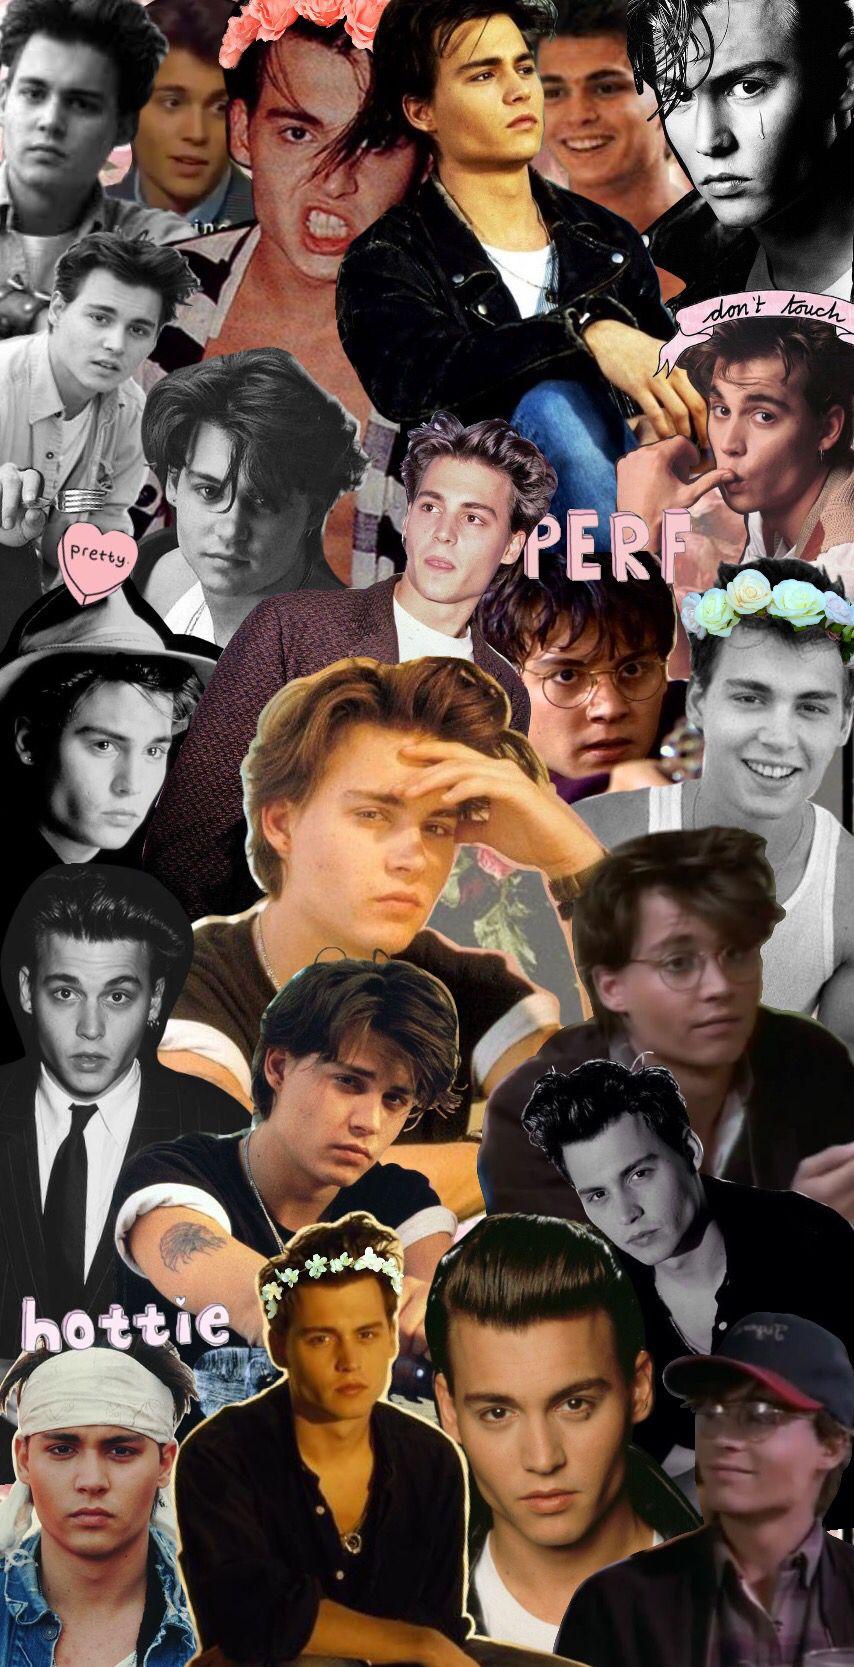 May I just say holy cow. Young johnny depp, Johnny